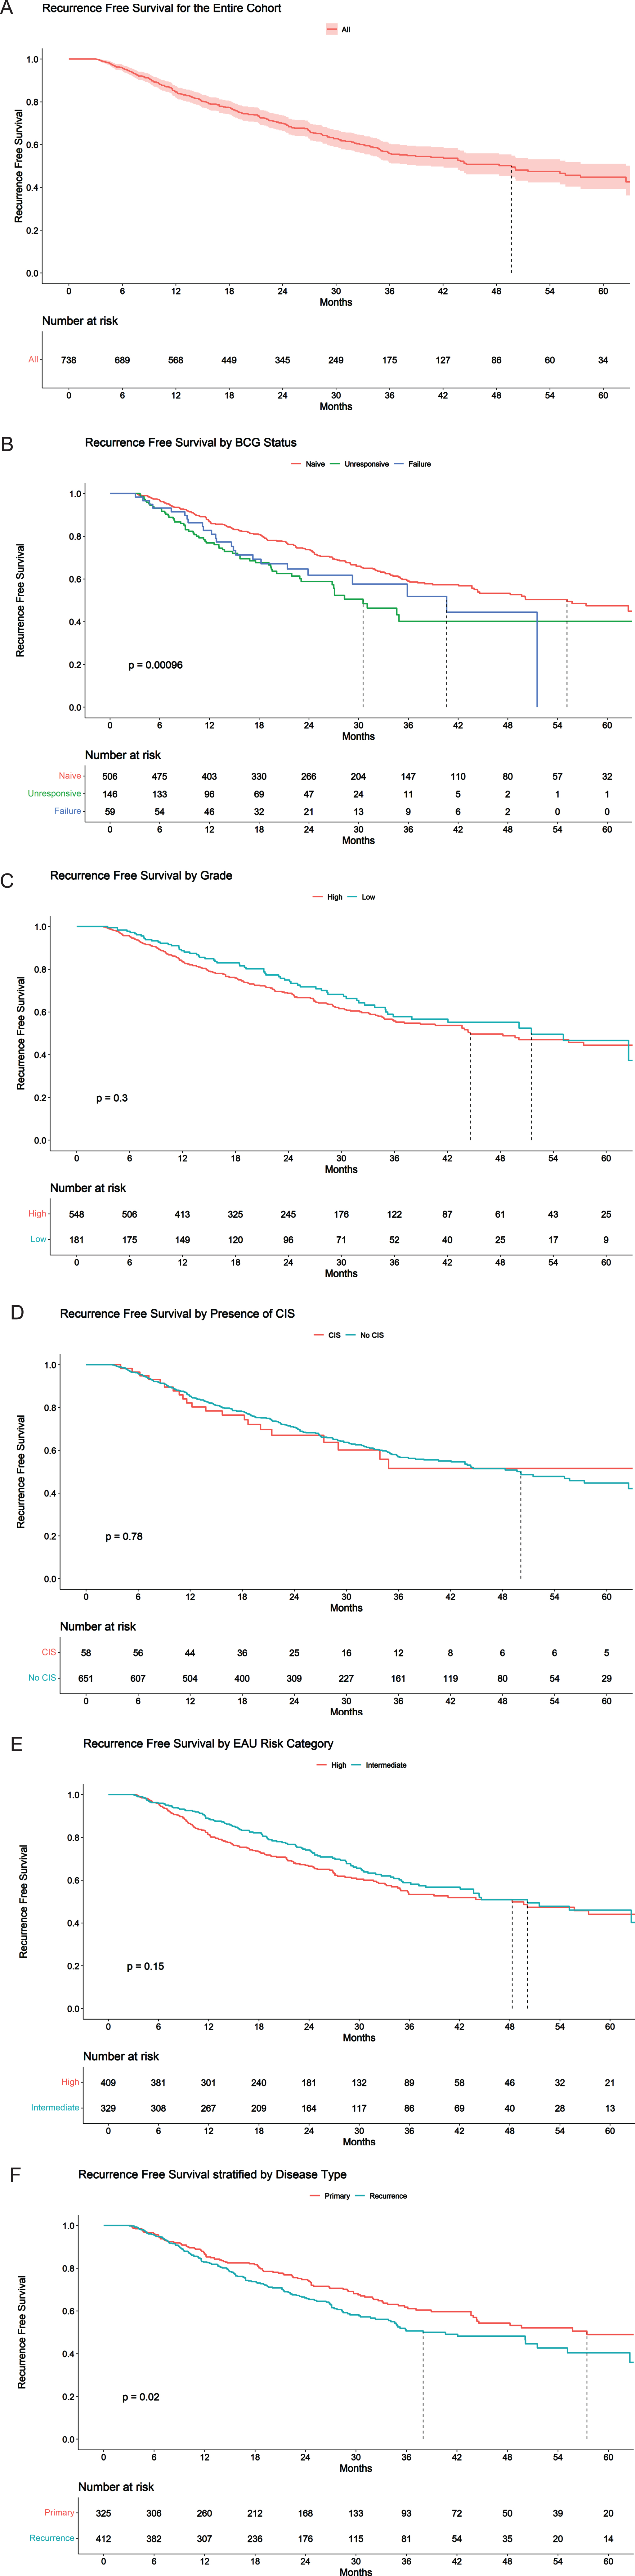 Recurrence free survival stratified by a) Entire cohort; b) BCG status; c) Grade; d) CIS; e) European Urological Association Risk Category; f) Disease type.